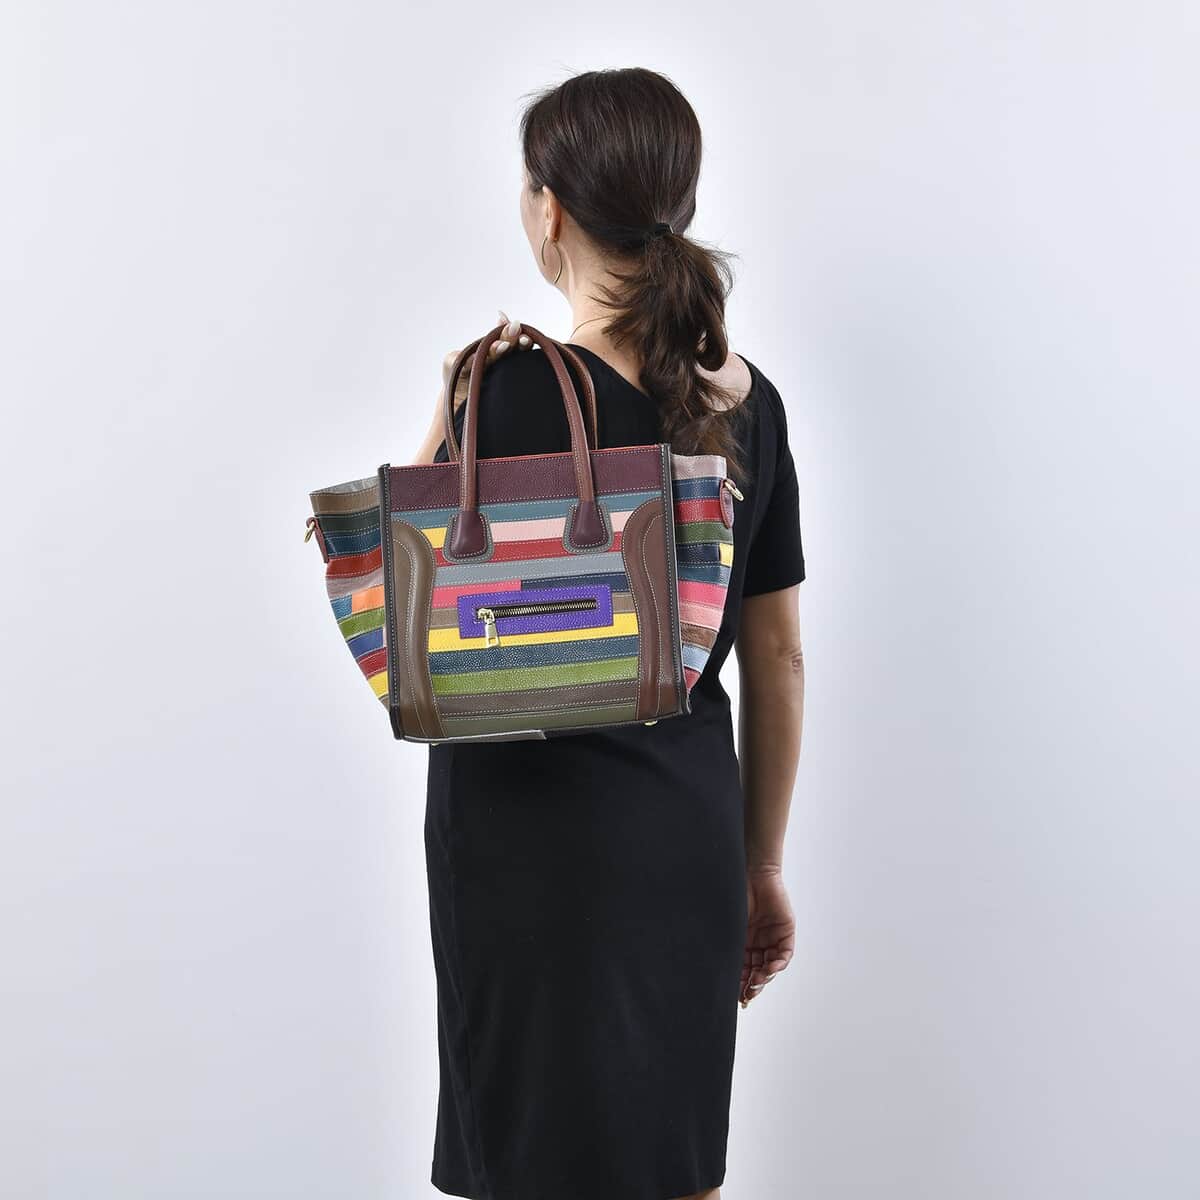 CHAOS Rainbow Color Patchwork Genuine Leather Convertible Tote Bag (19.69"x7.87"x11.02") with Long Shoulder Strap image number 2